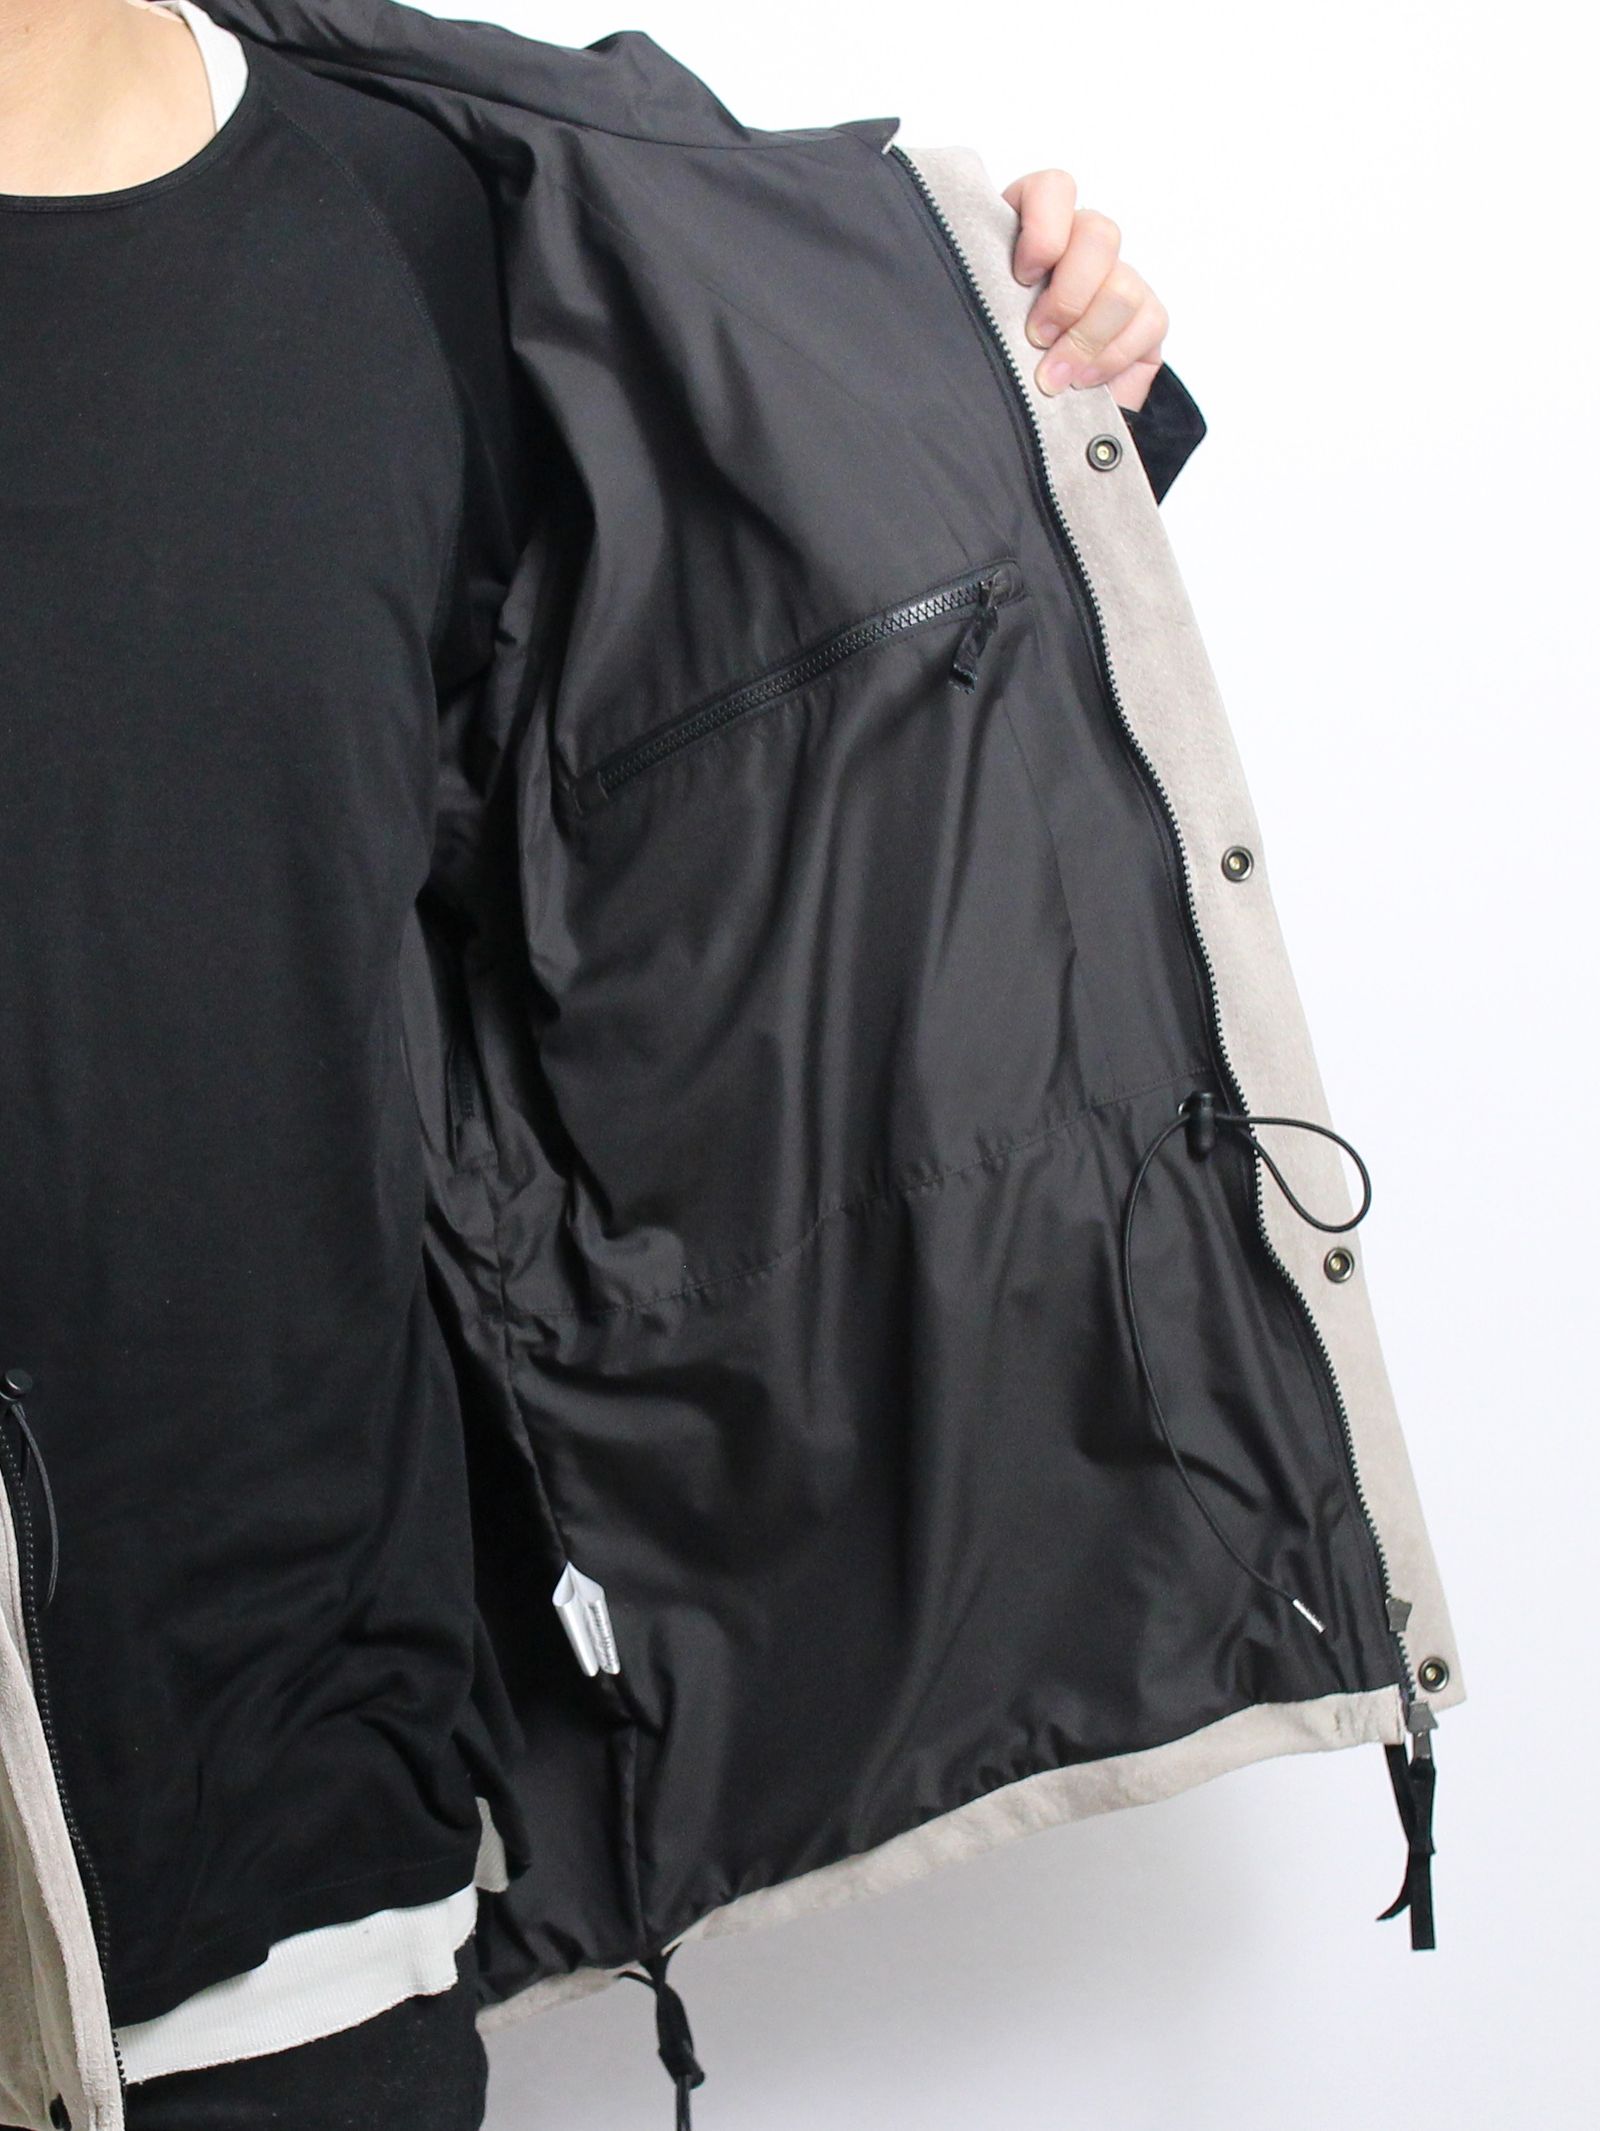 SEVEN BY SEVEN - レザーマウンテンパーカー - LEATHER MOUNTAIN PARKA 